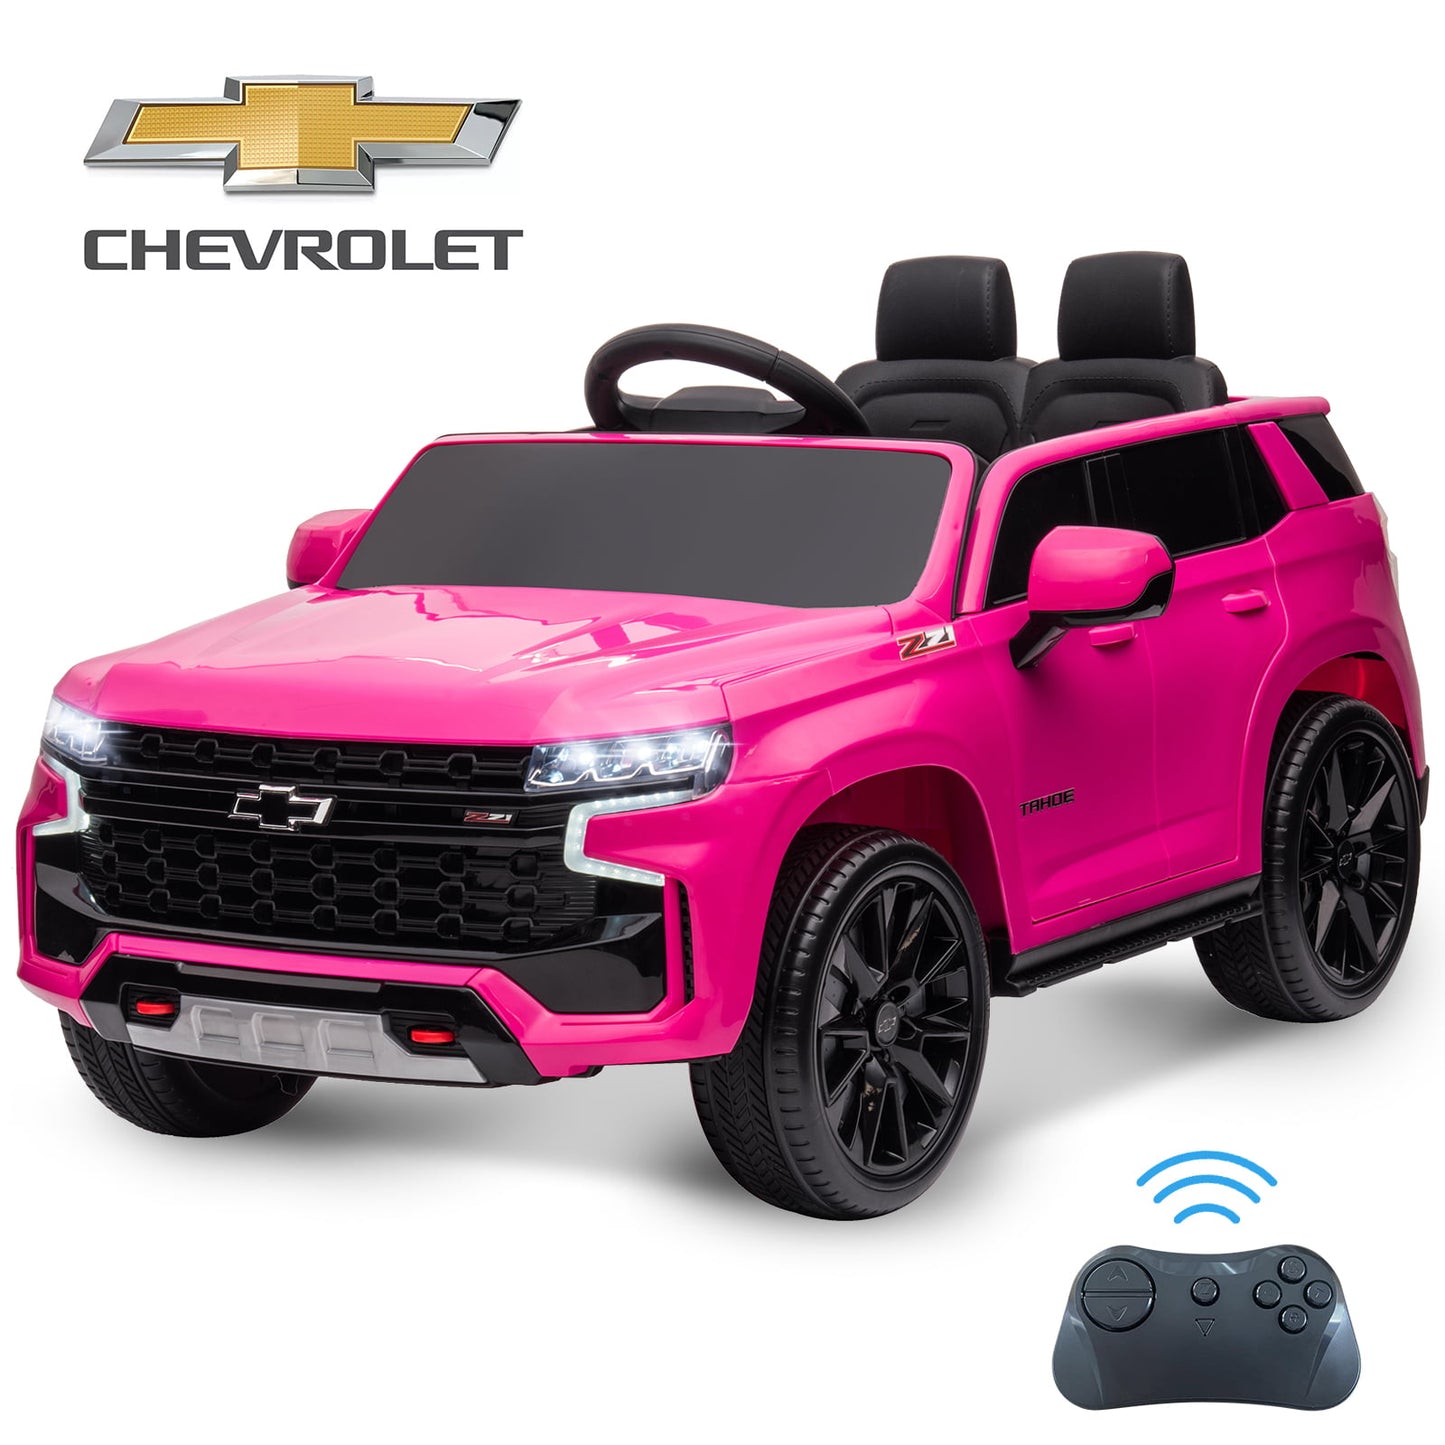 Syngar Chevrolet 12V Battery Powered Car Toy for Girls Boys, Kids Ride on Car with Remote Control, LED Light, MP3, Bluetooth,Seat Belt, Electric Truck for 3+ Kids Birthday Gift, Pink